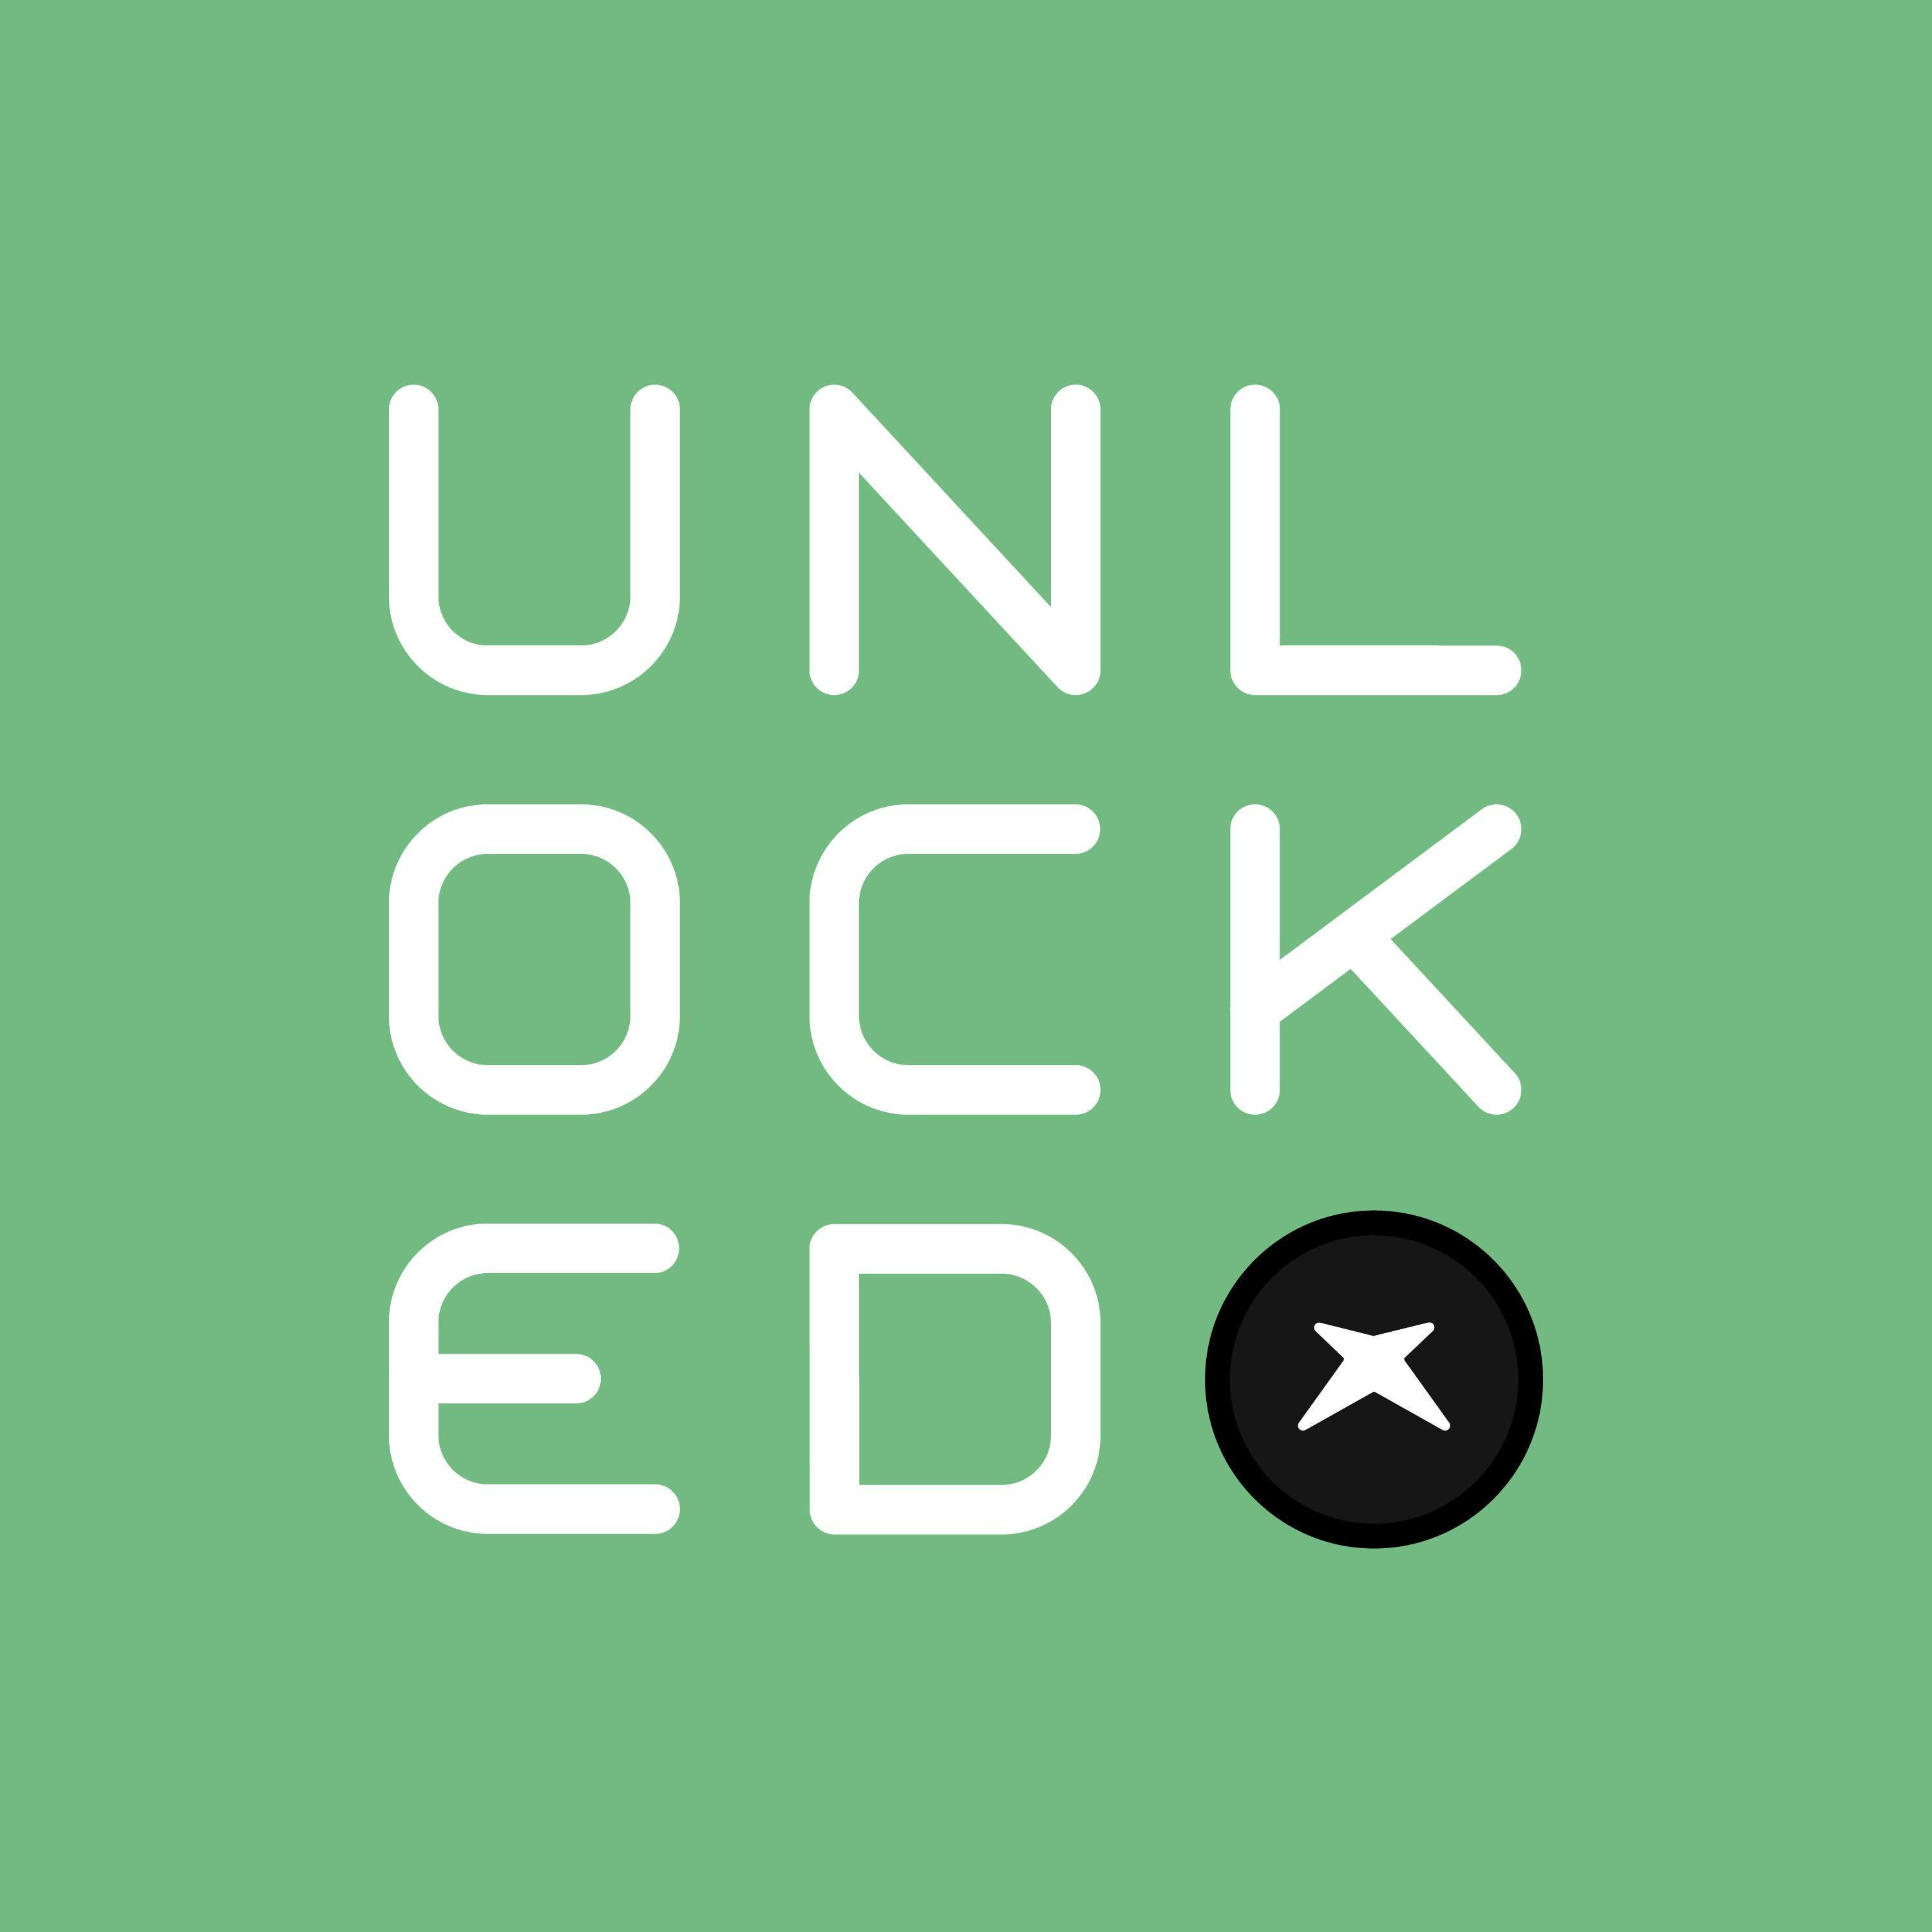 Podcast Unlocked Episode 238: Halo 1 and Shadow Complex Developer Interviews